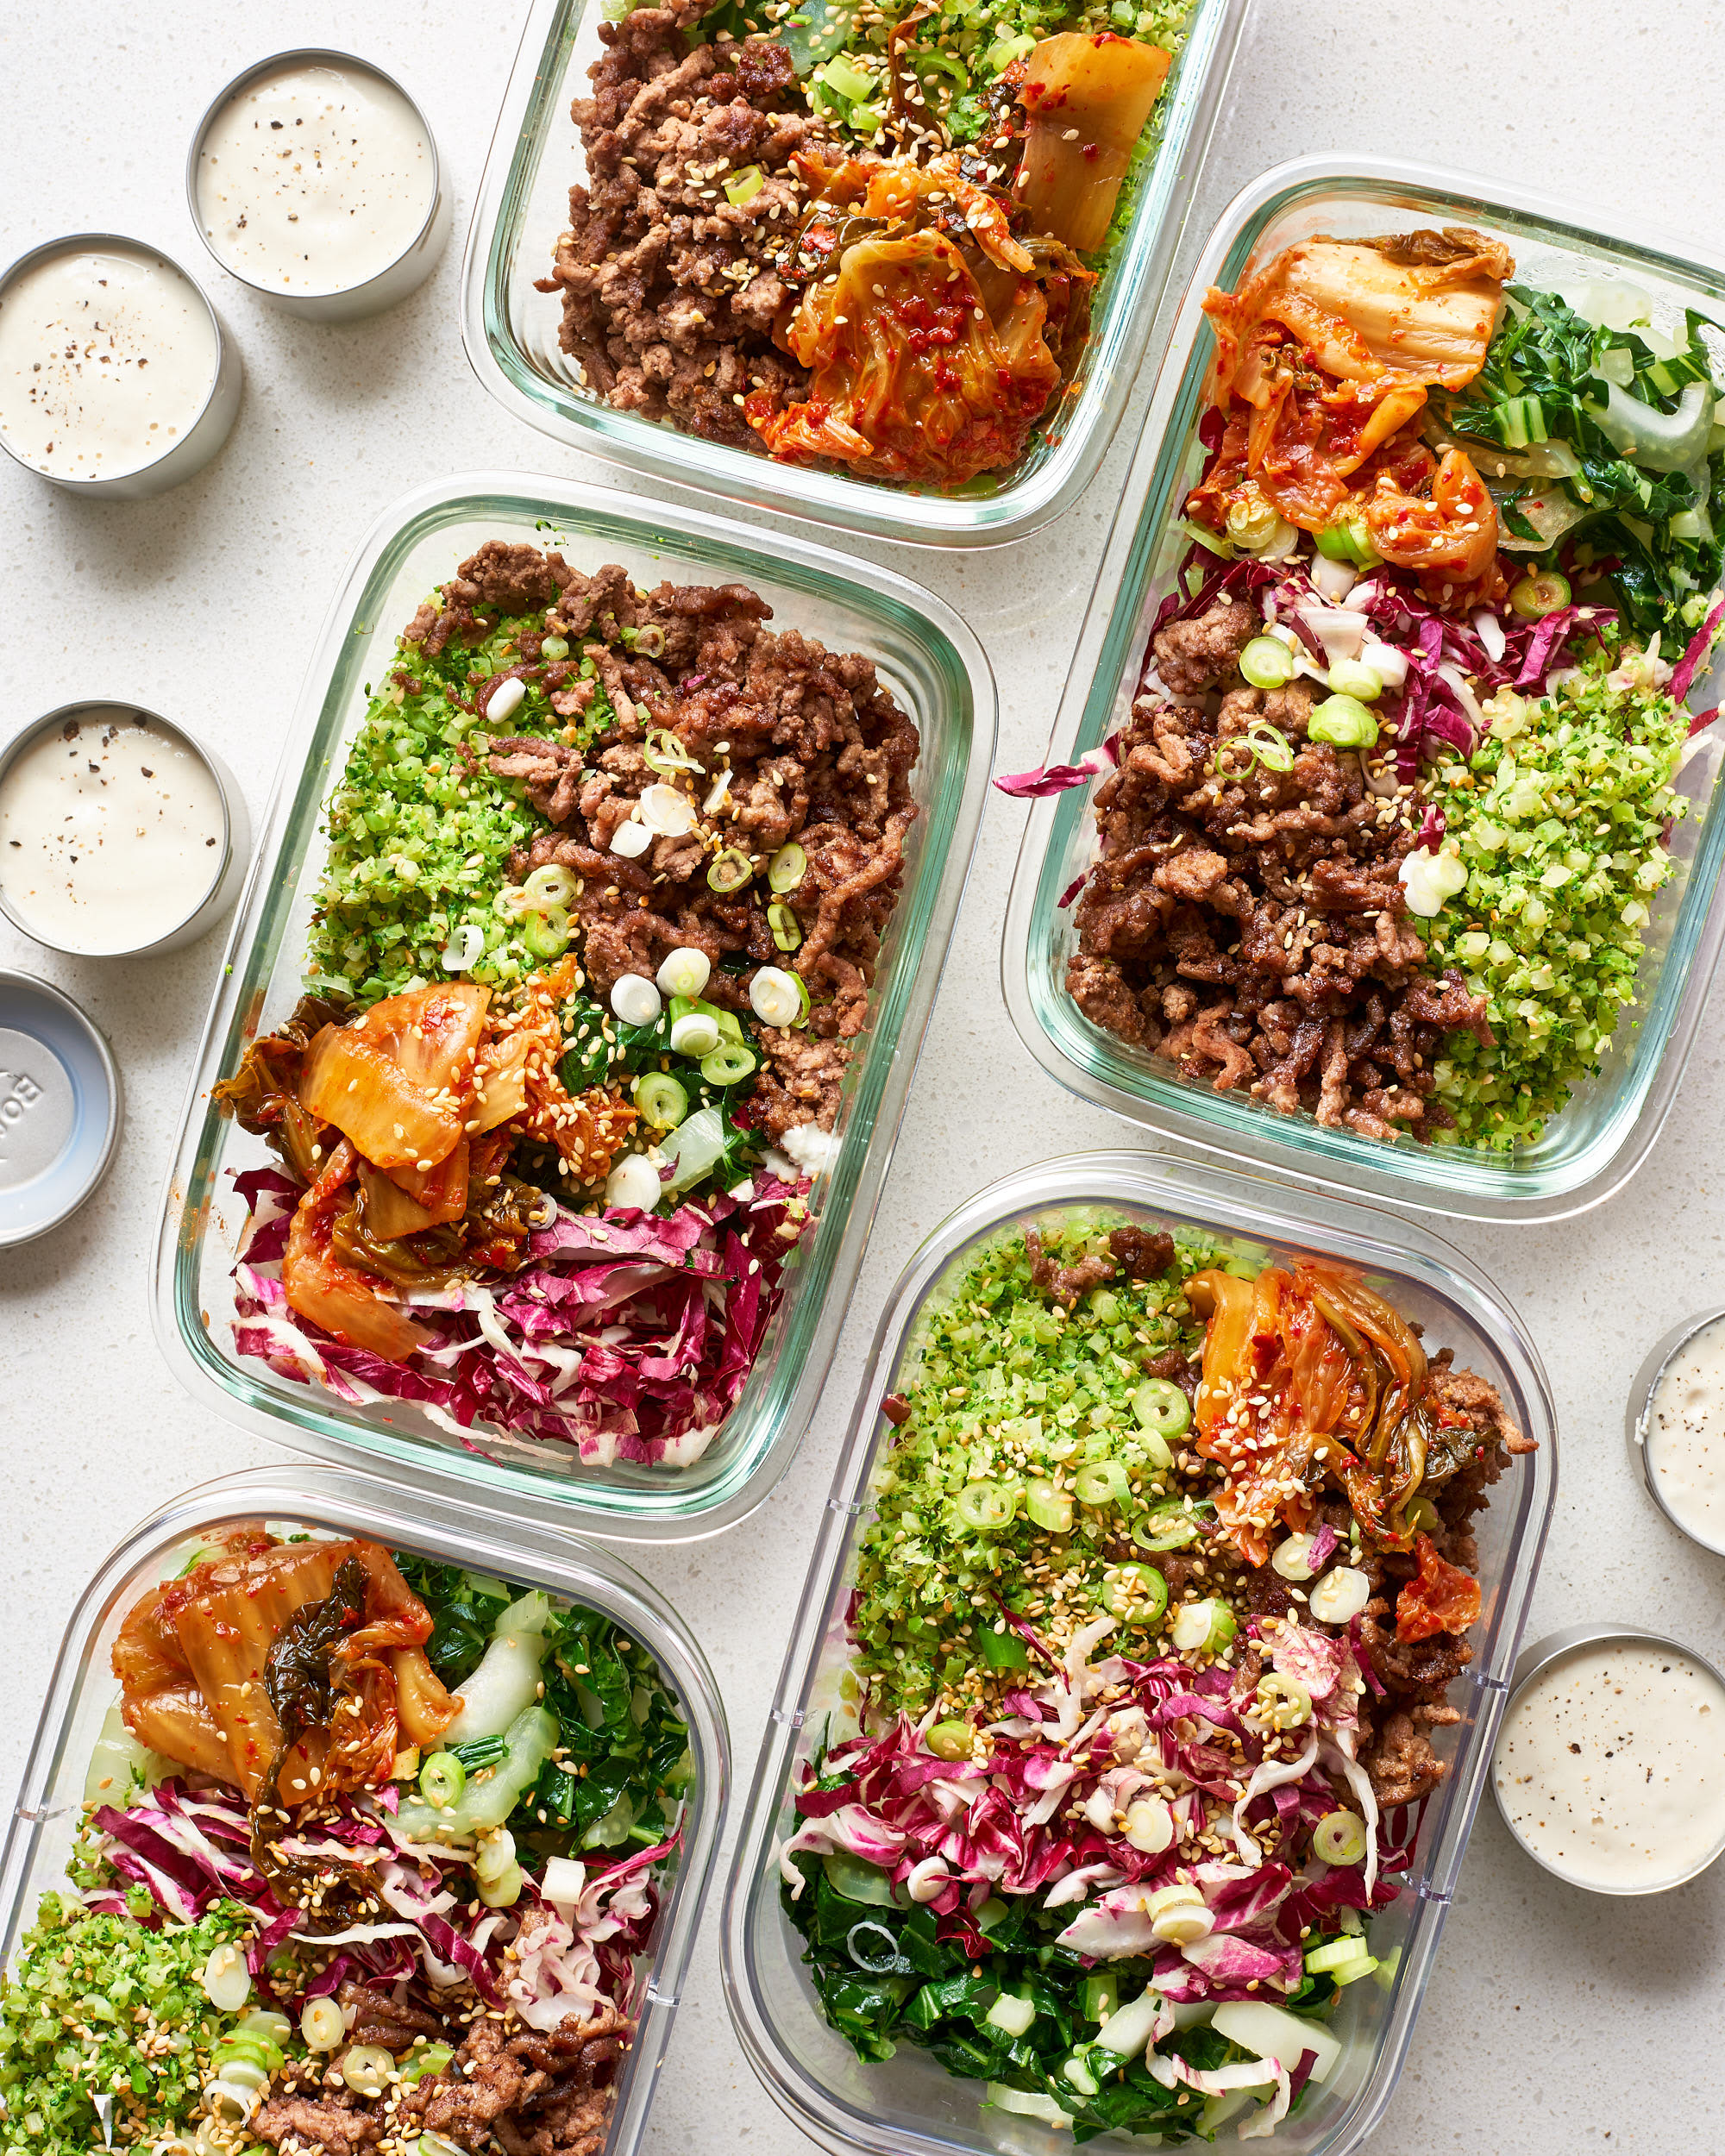 10 Easy Meal Prep Recipes - Eat Yourself Skinny